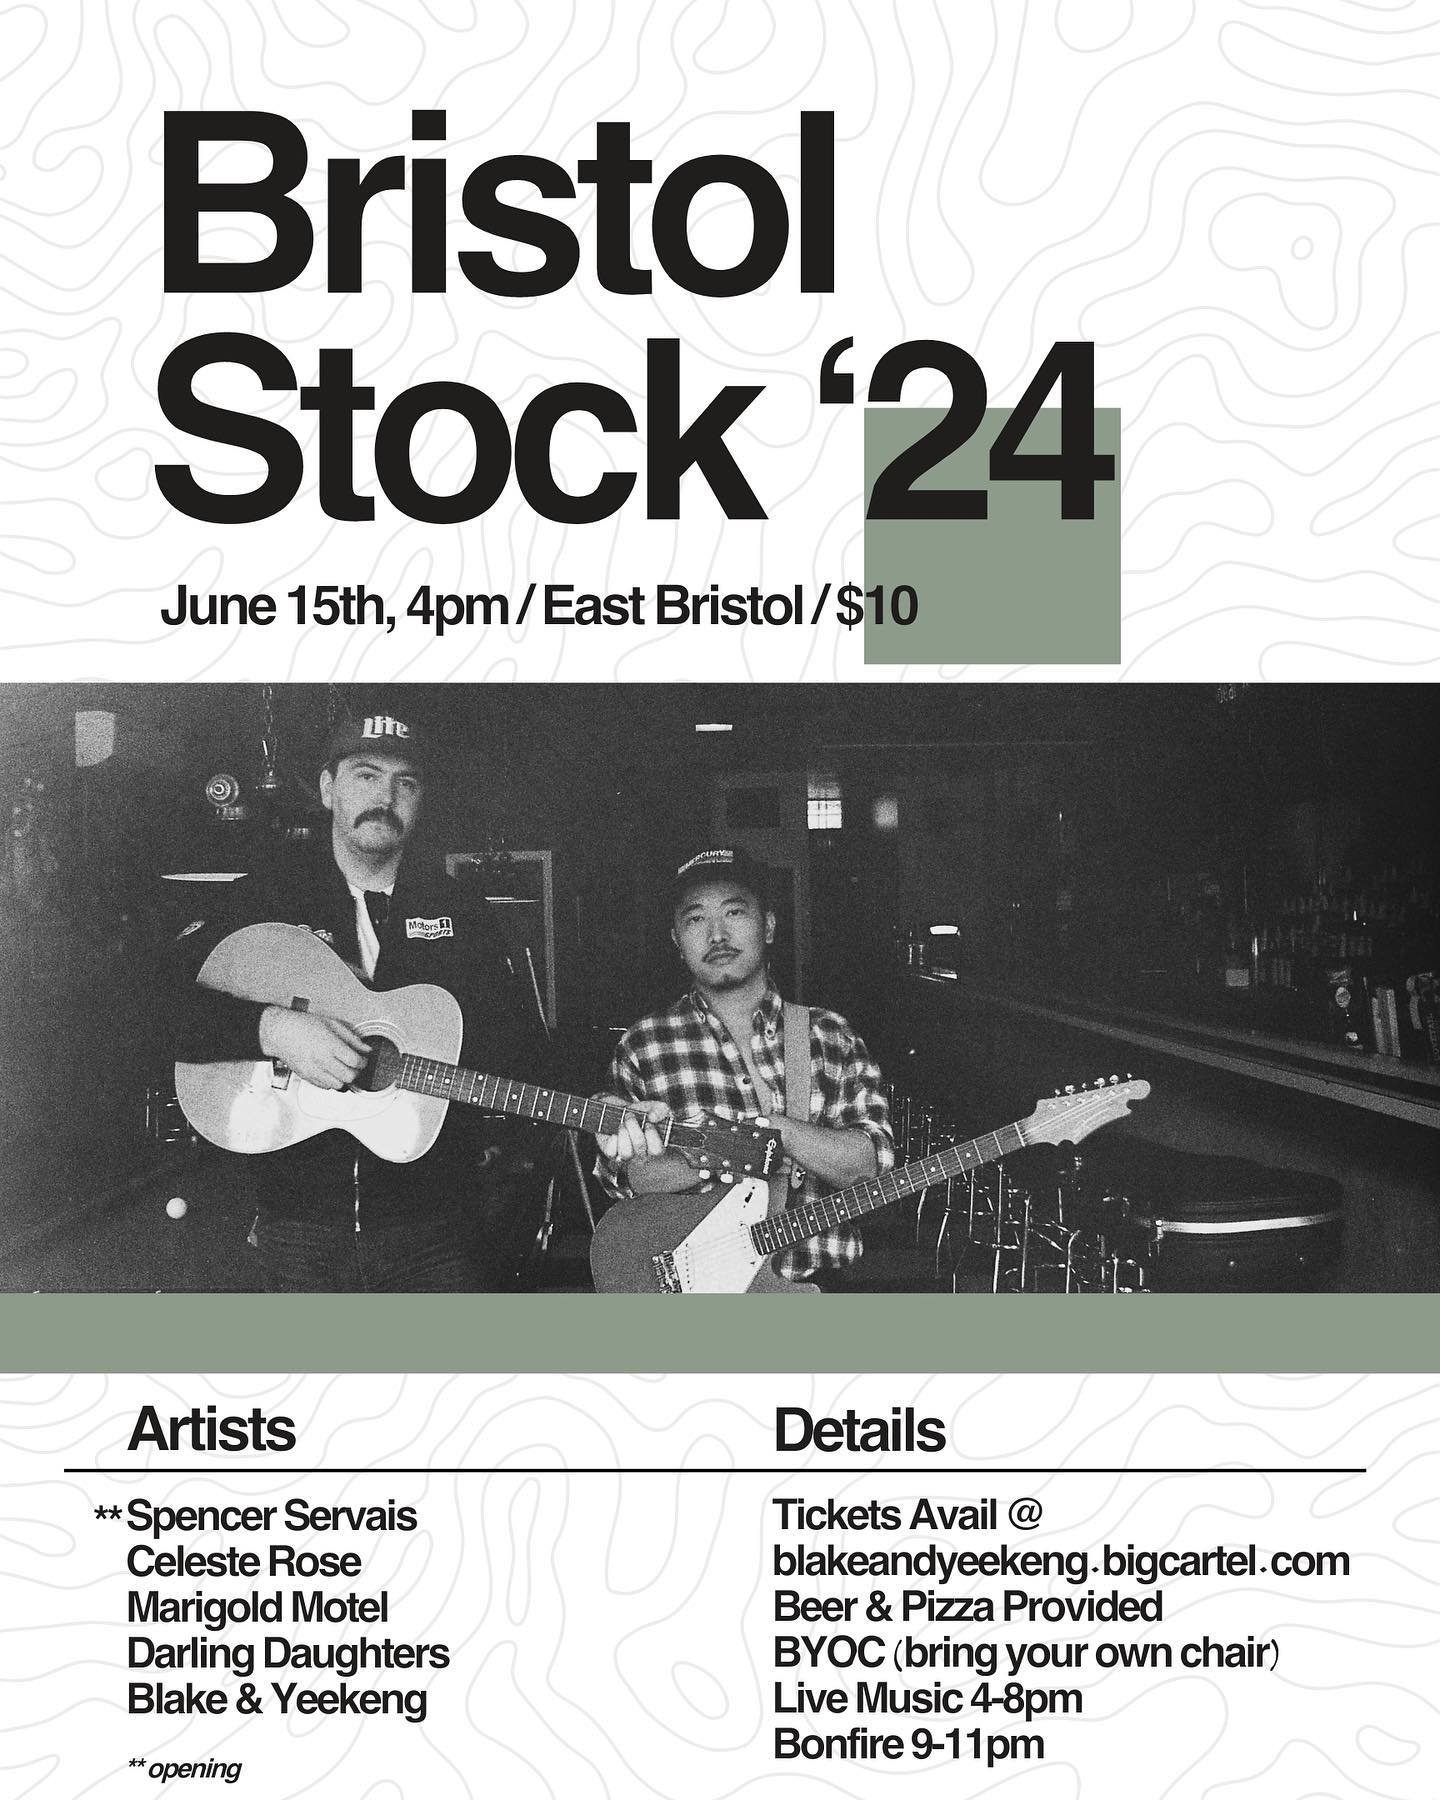 BRISTOL STOCK &lsquo;24 🍻🤠

I&rsquo;m so flippin&rsquo; excited to have been invited to play at a house show hosted by @blakeandyeekeng this June!! Get yer tickets for this one folks (link in bio of course)&hellip;. Chicago, Milwaukee, and Madison 